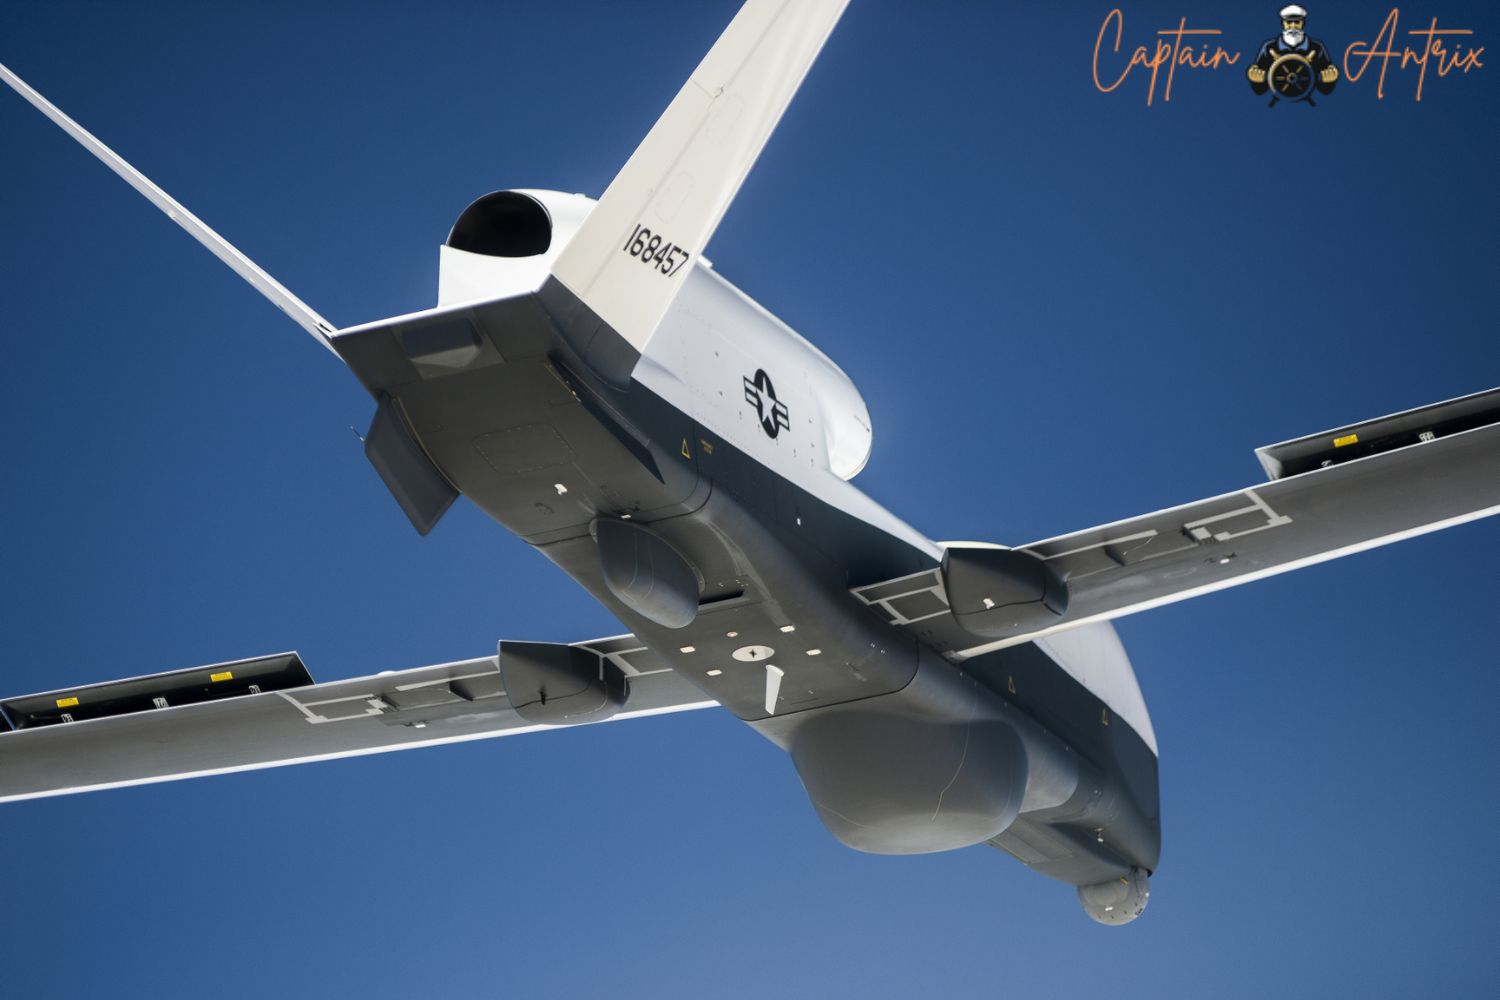 MQ-4C Triton Unmanned Aircraft System: Key Contract and Advanced Features